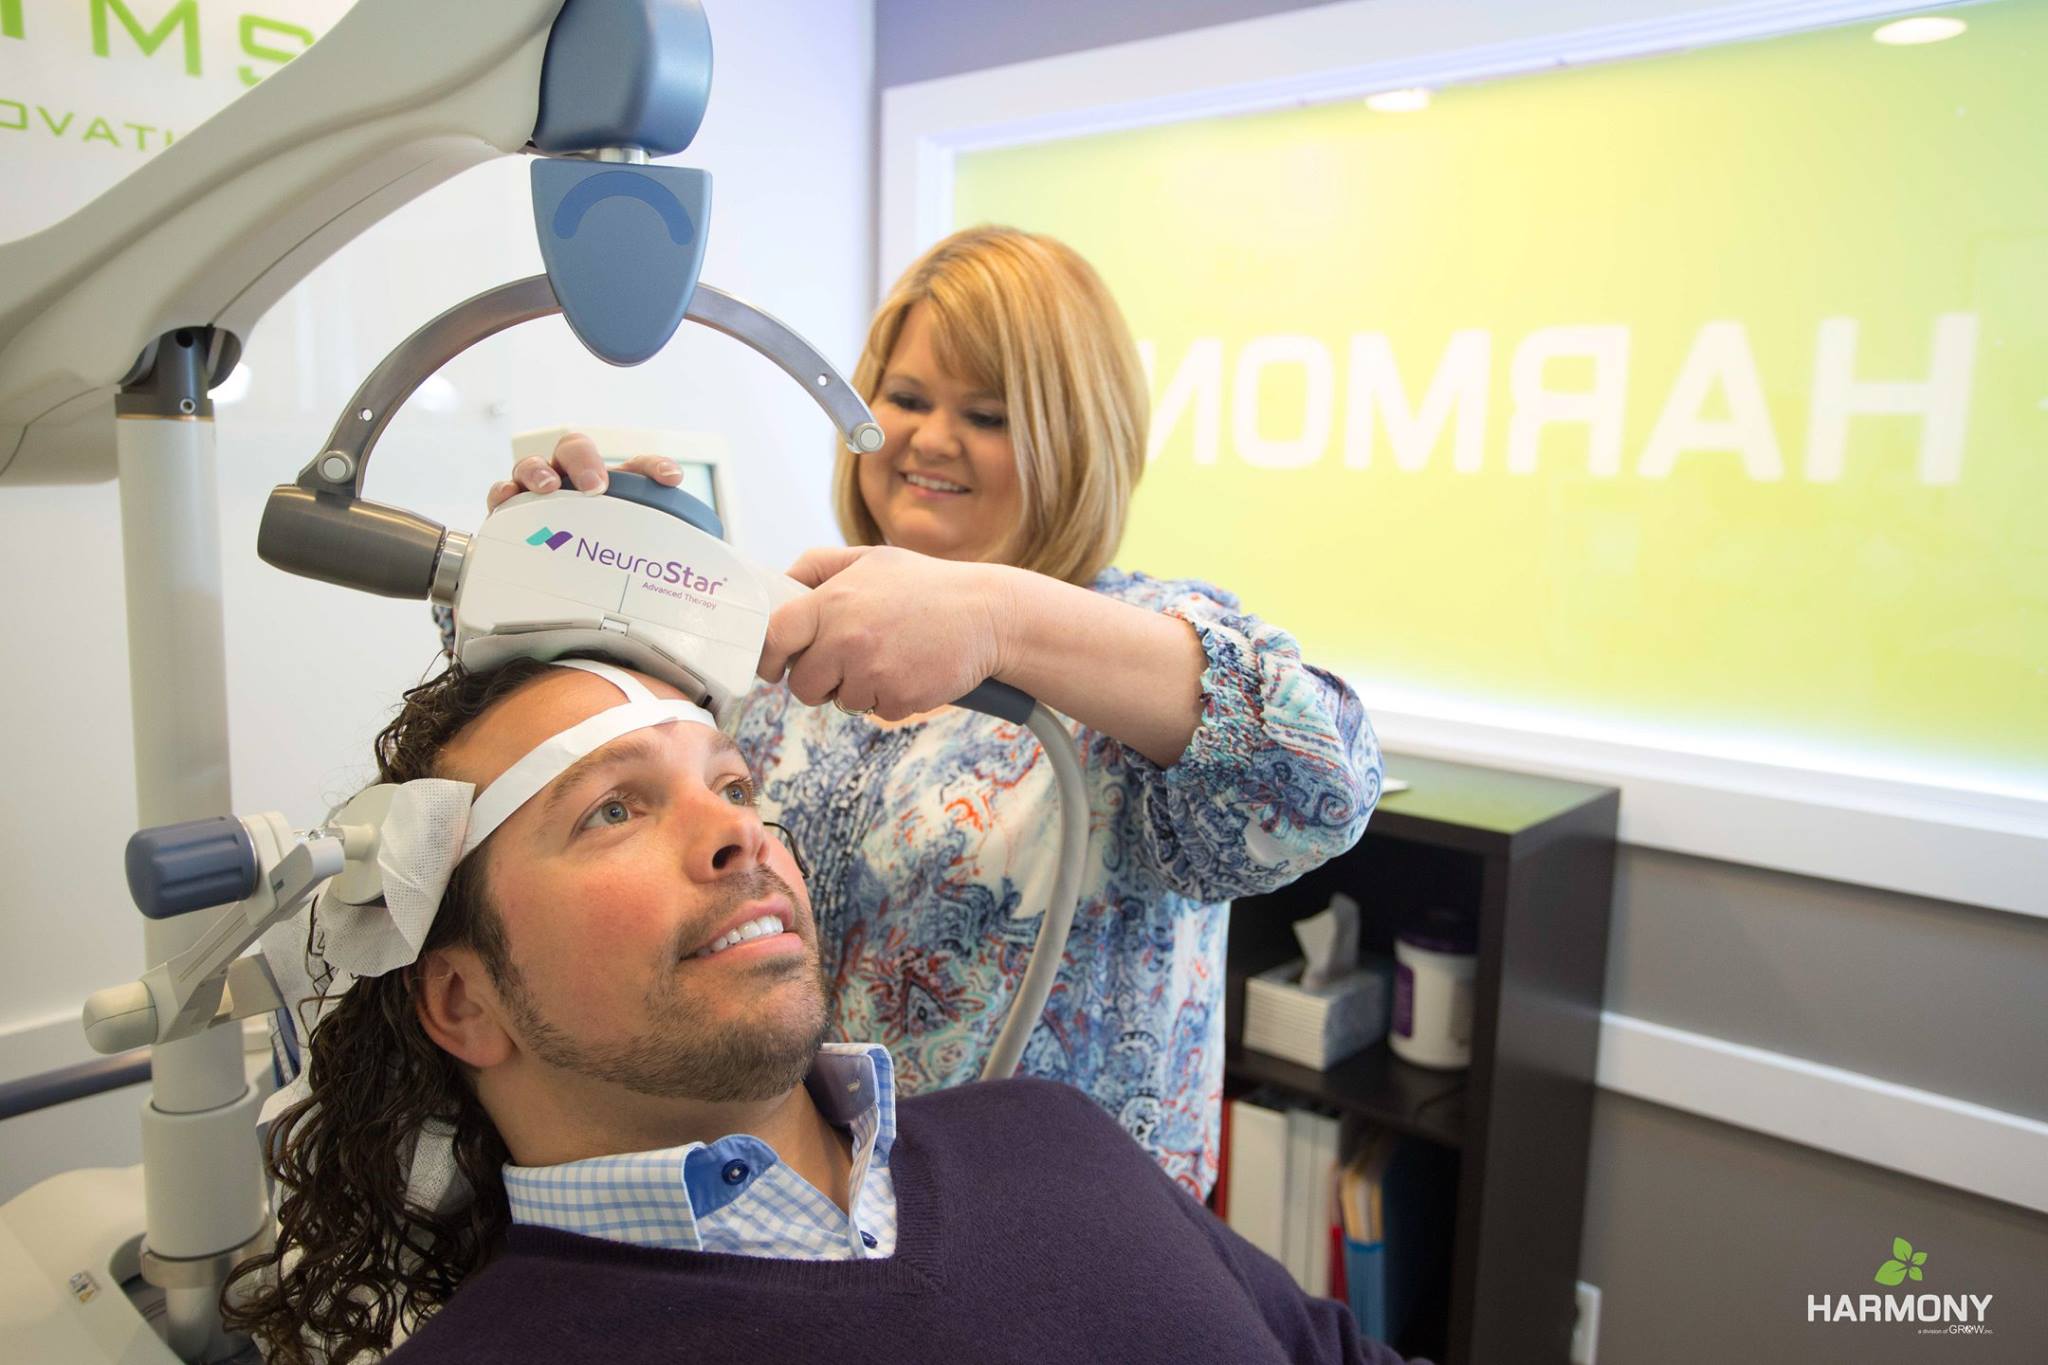 A man in a purple sweater reclines in a chair as a woman with short blonde hair, the tms technician, places the neurostar tms want against his head.